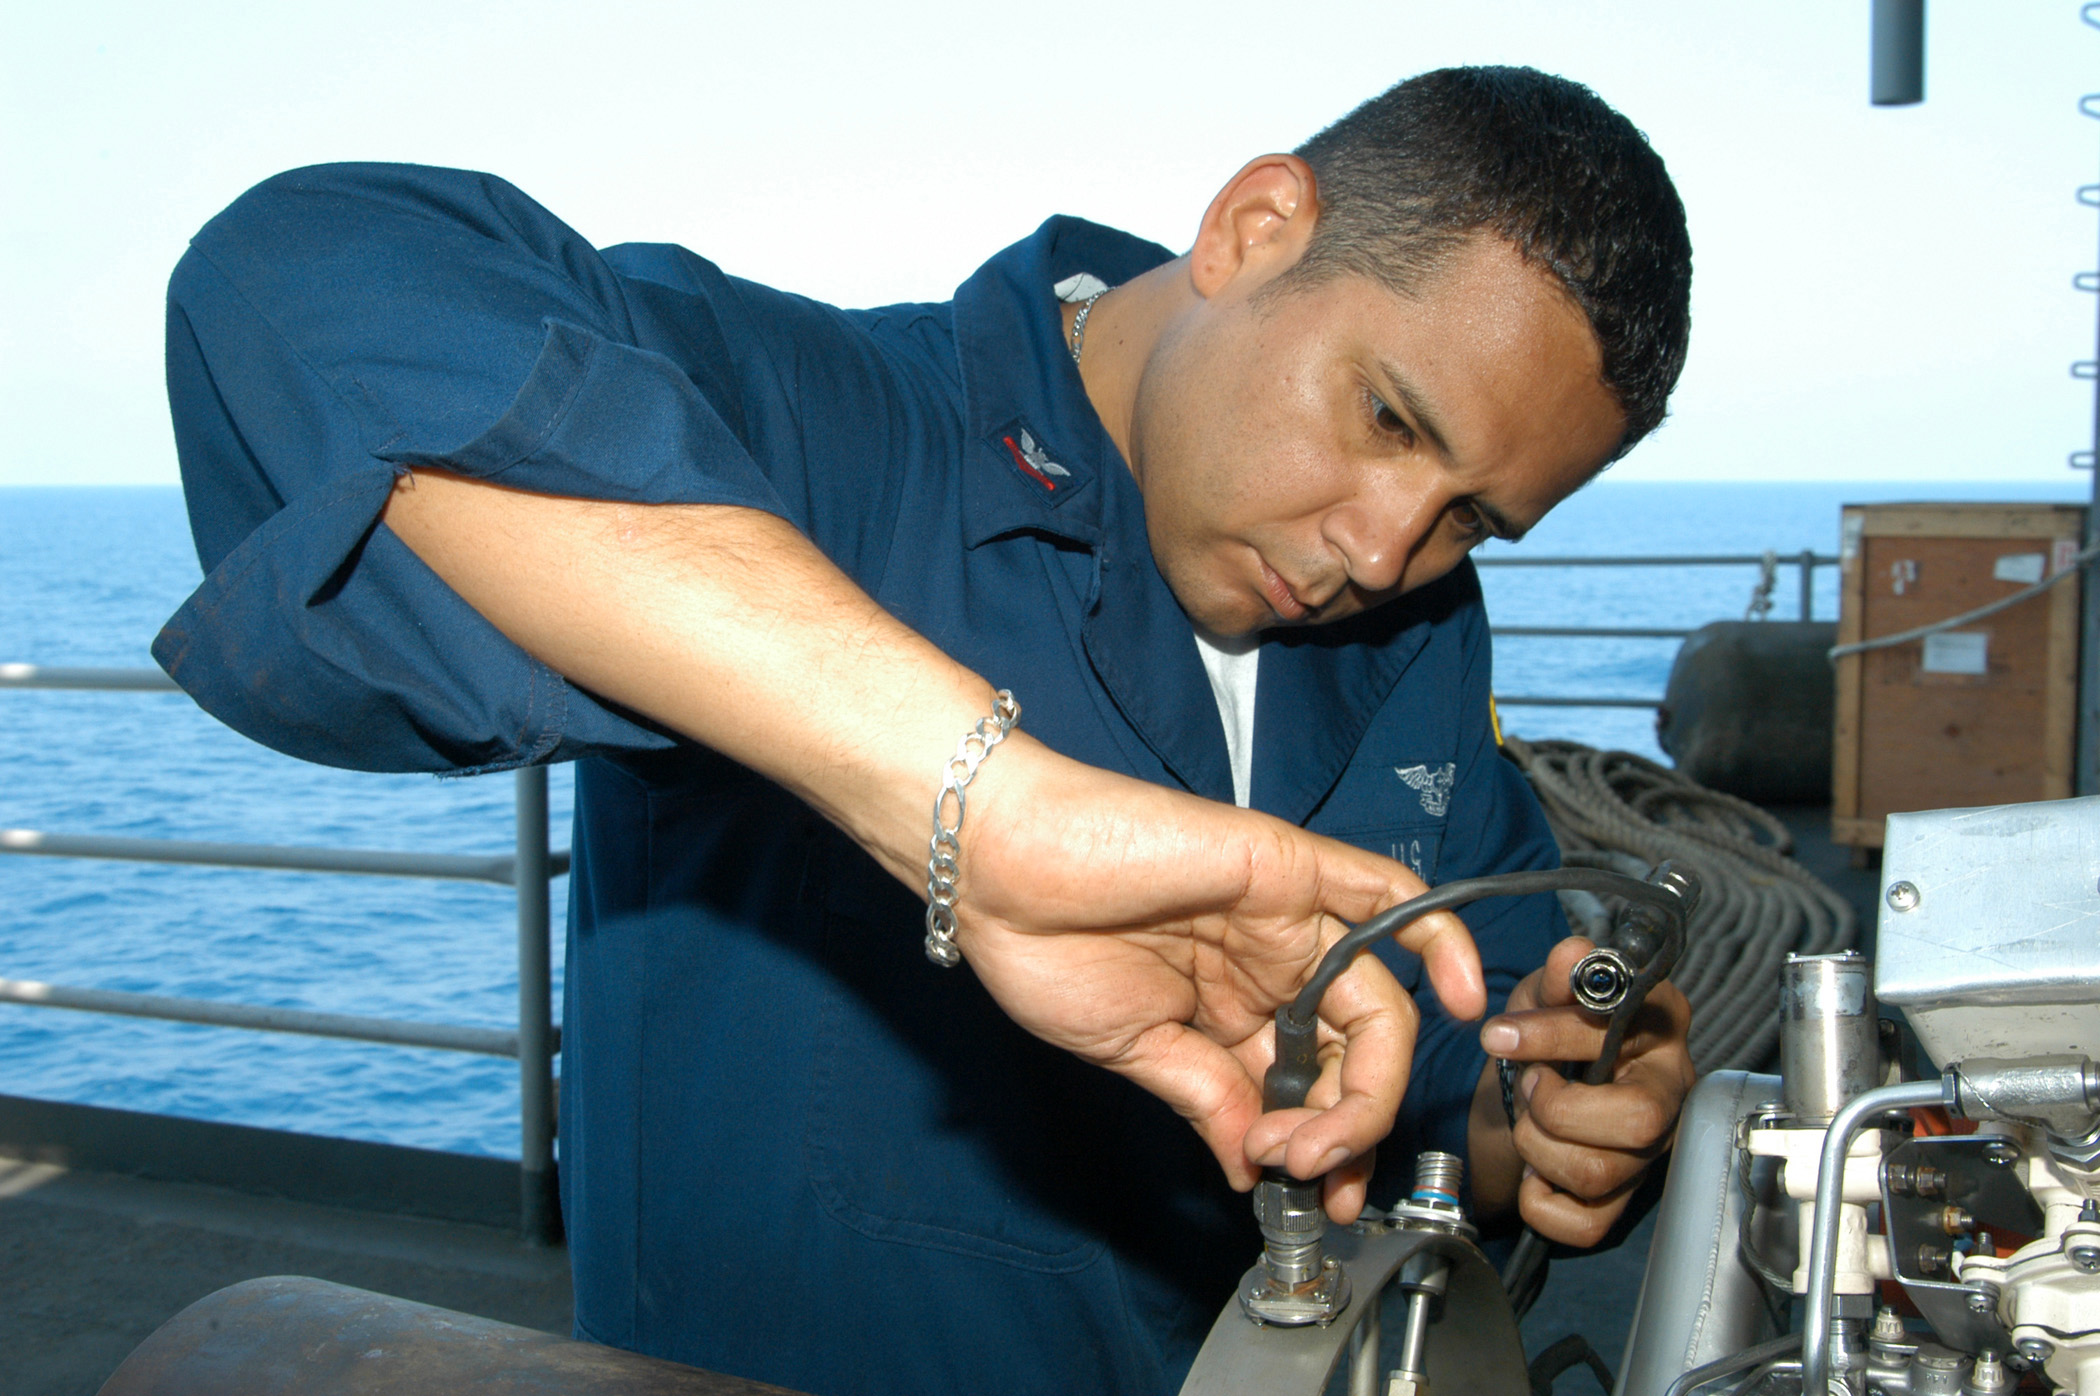 US Navy 040701-N-7695R-002 Aviation Machinist Mate 2nd Class Miguel Ramirez is completing maintenance on the Auxiliary Power Unit (APU) for an F-A-18 